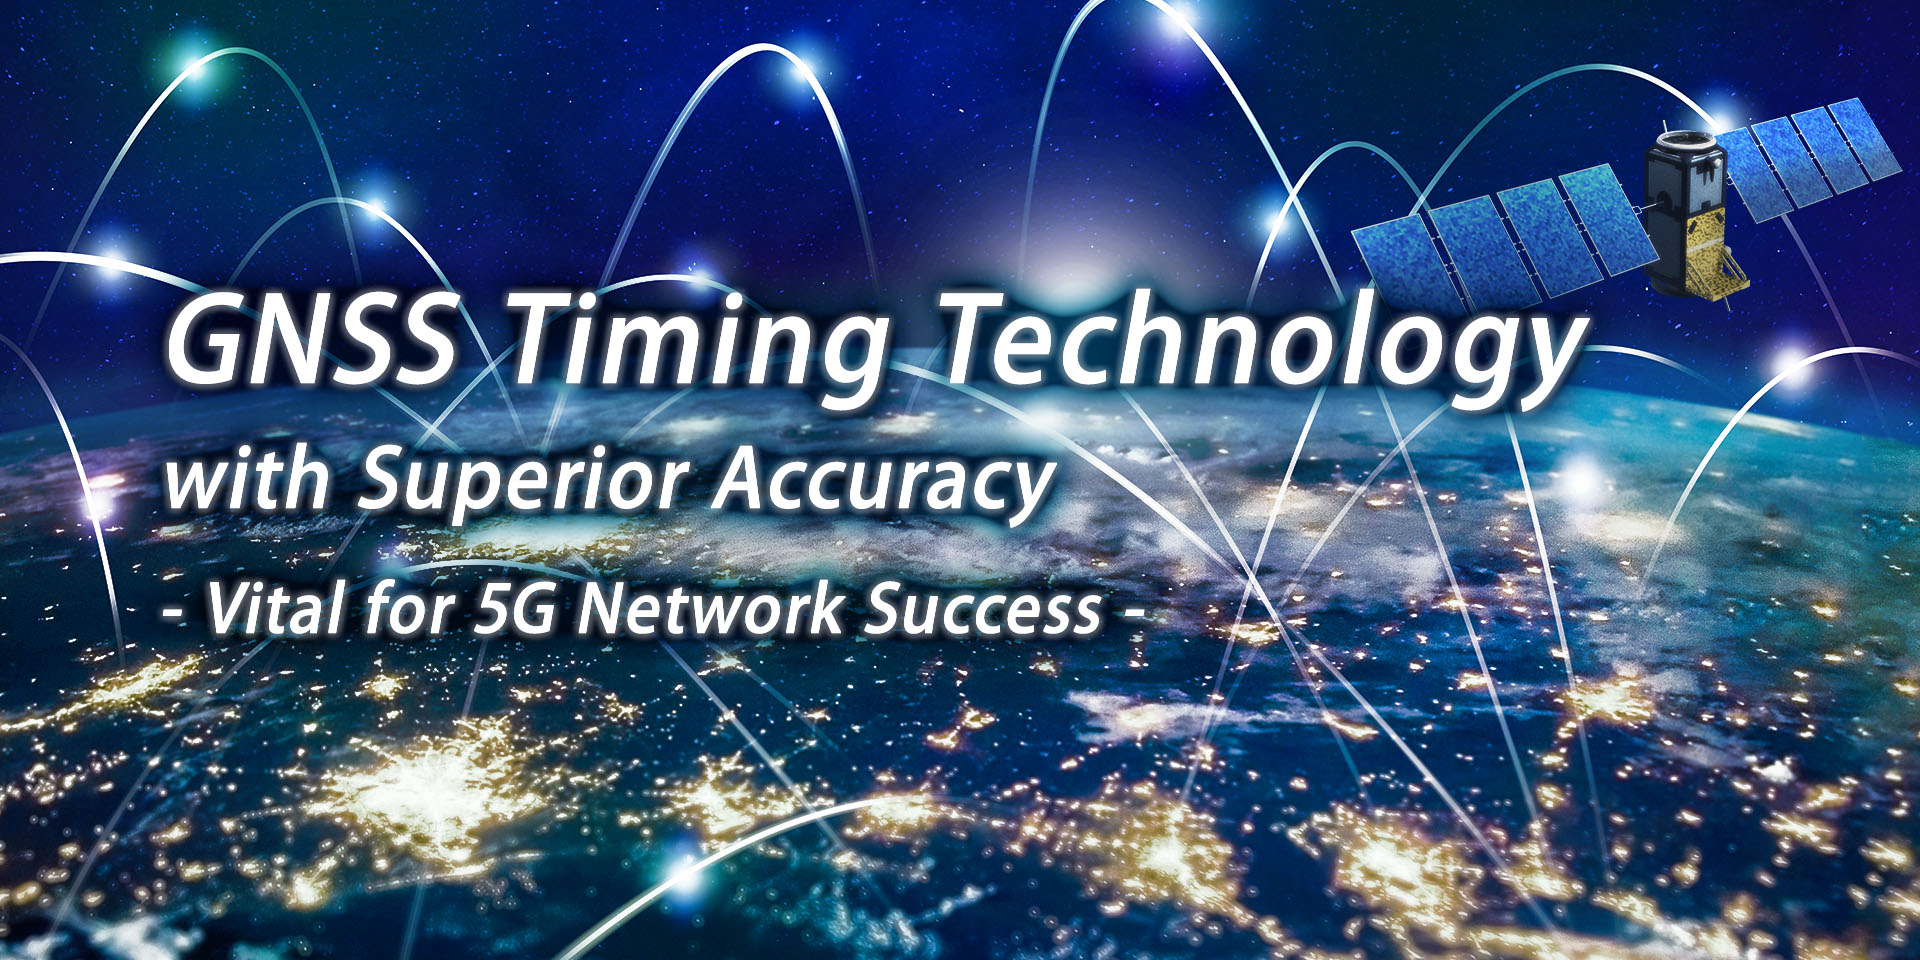 GNSS Timing Technology with Superior Accuracy - Vital for 5G Network Success -